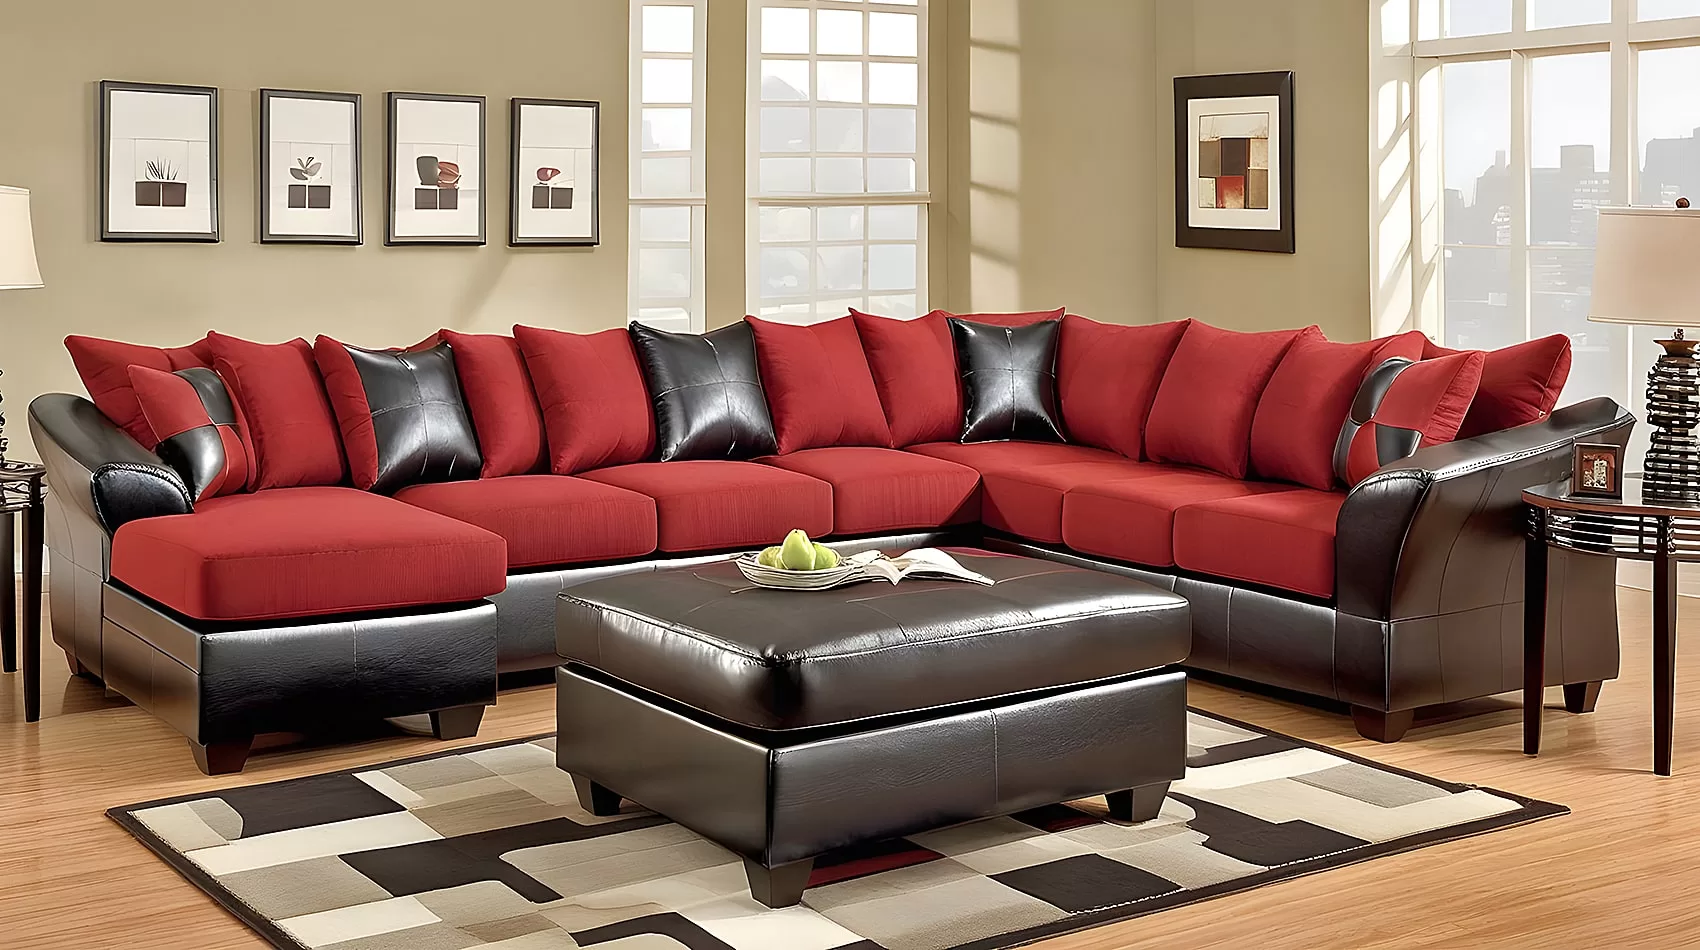 Red Sofa Sectional | Red Couch Sectional